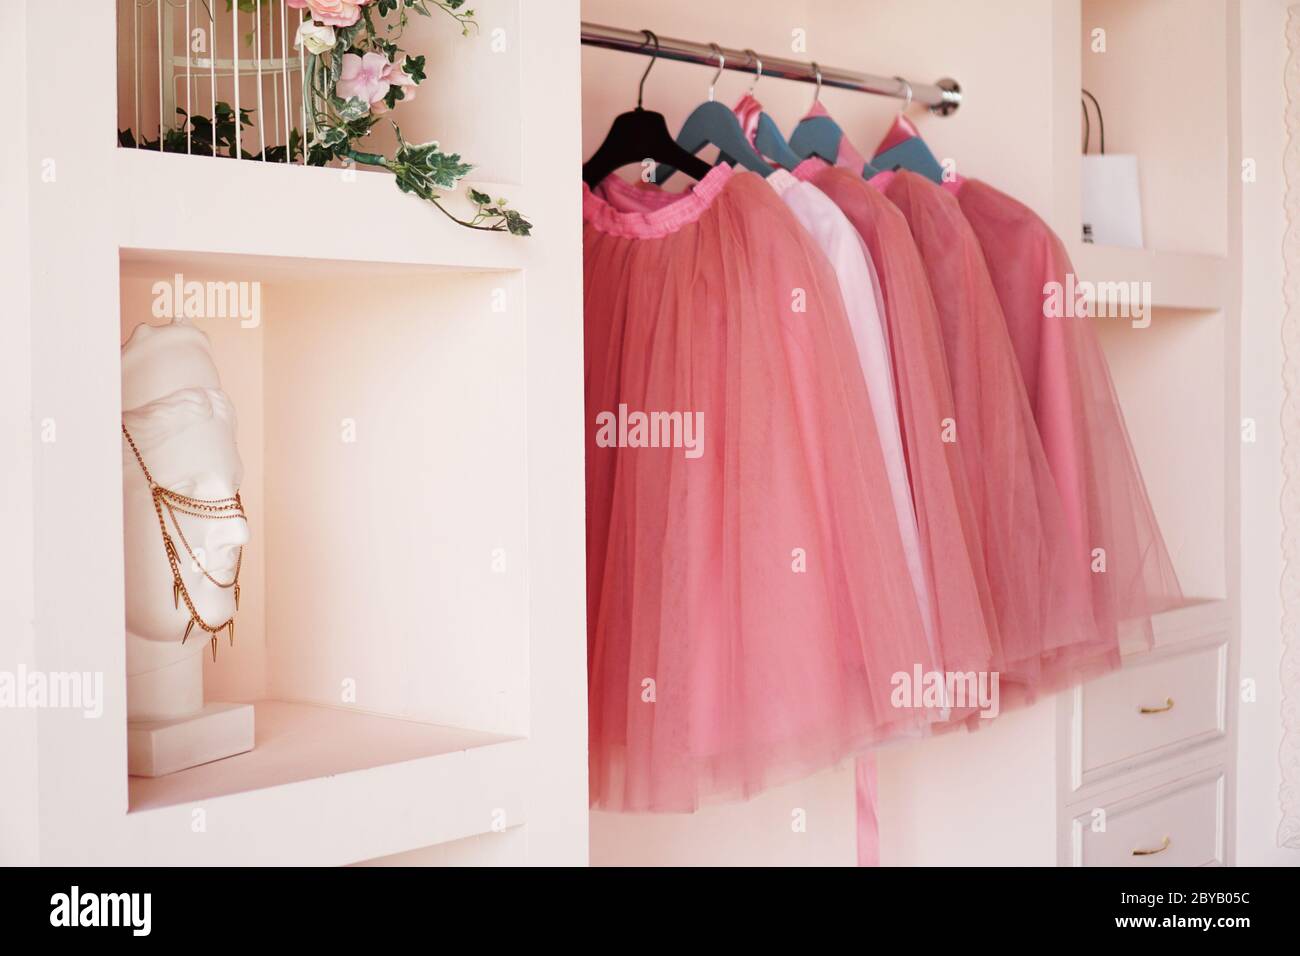 Dressing closet with pink clothes is arranged on hangers. The wardrobe is full of pink skirts, accessories on the shelves. Stock Photo